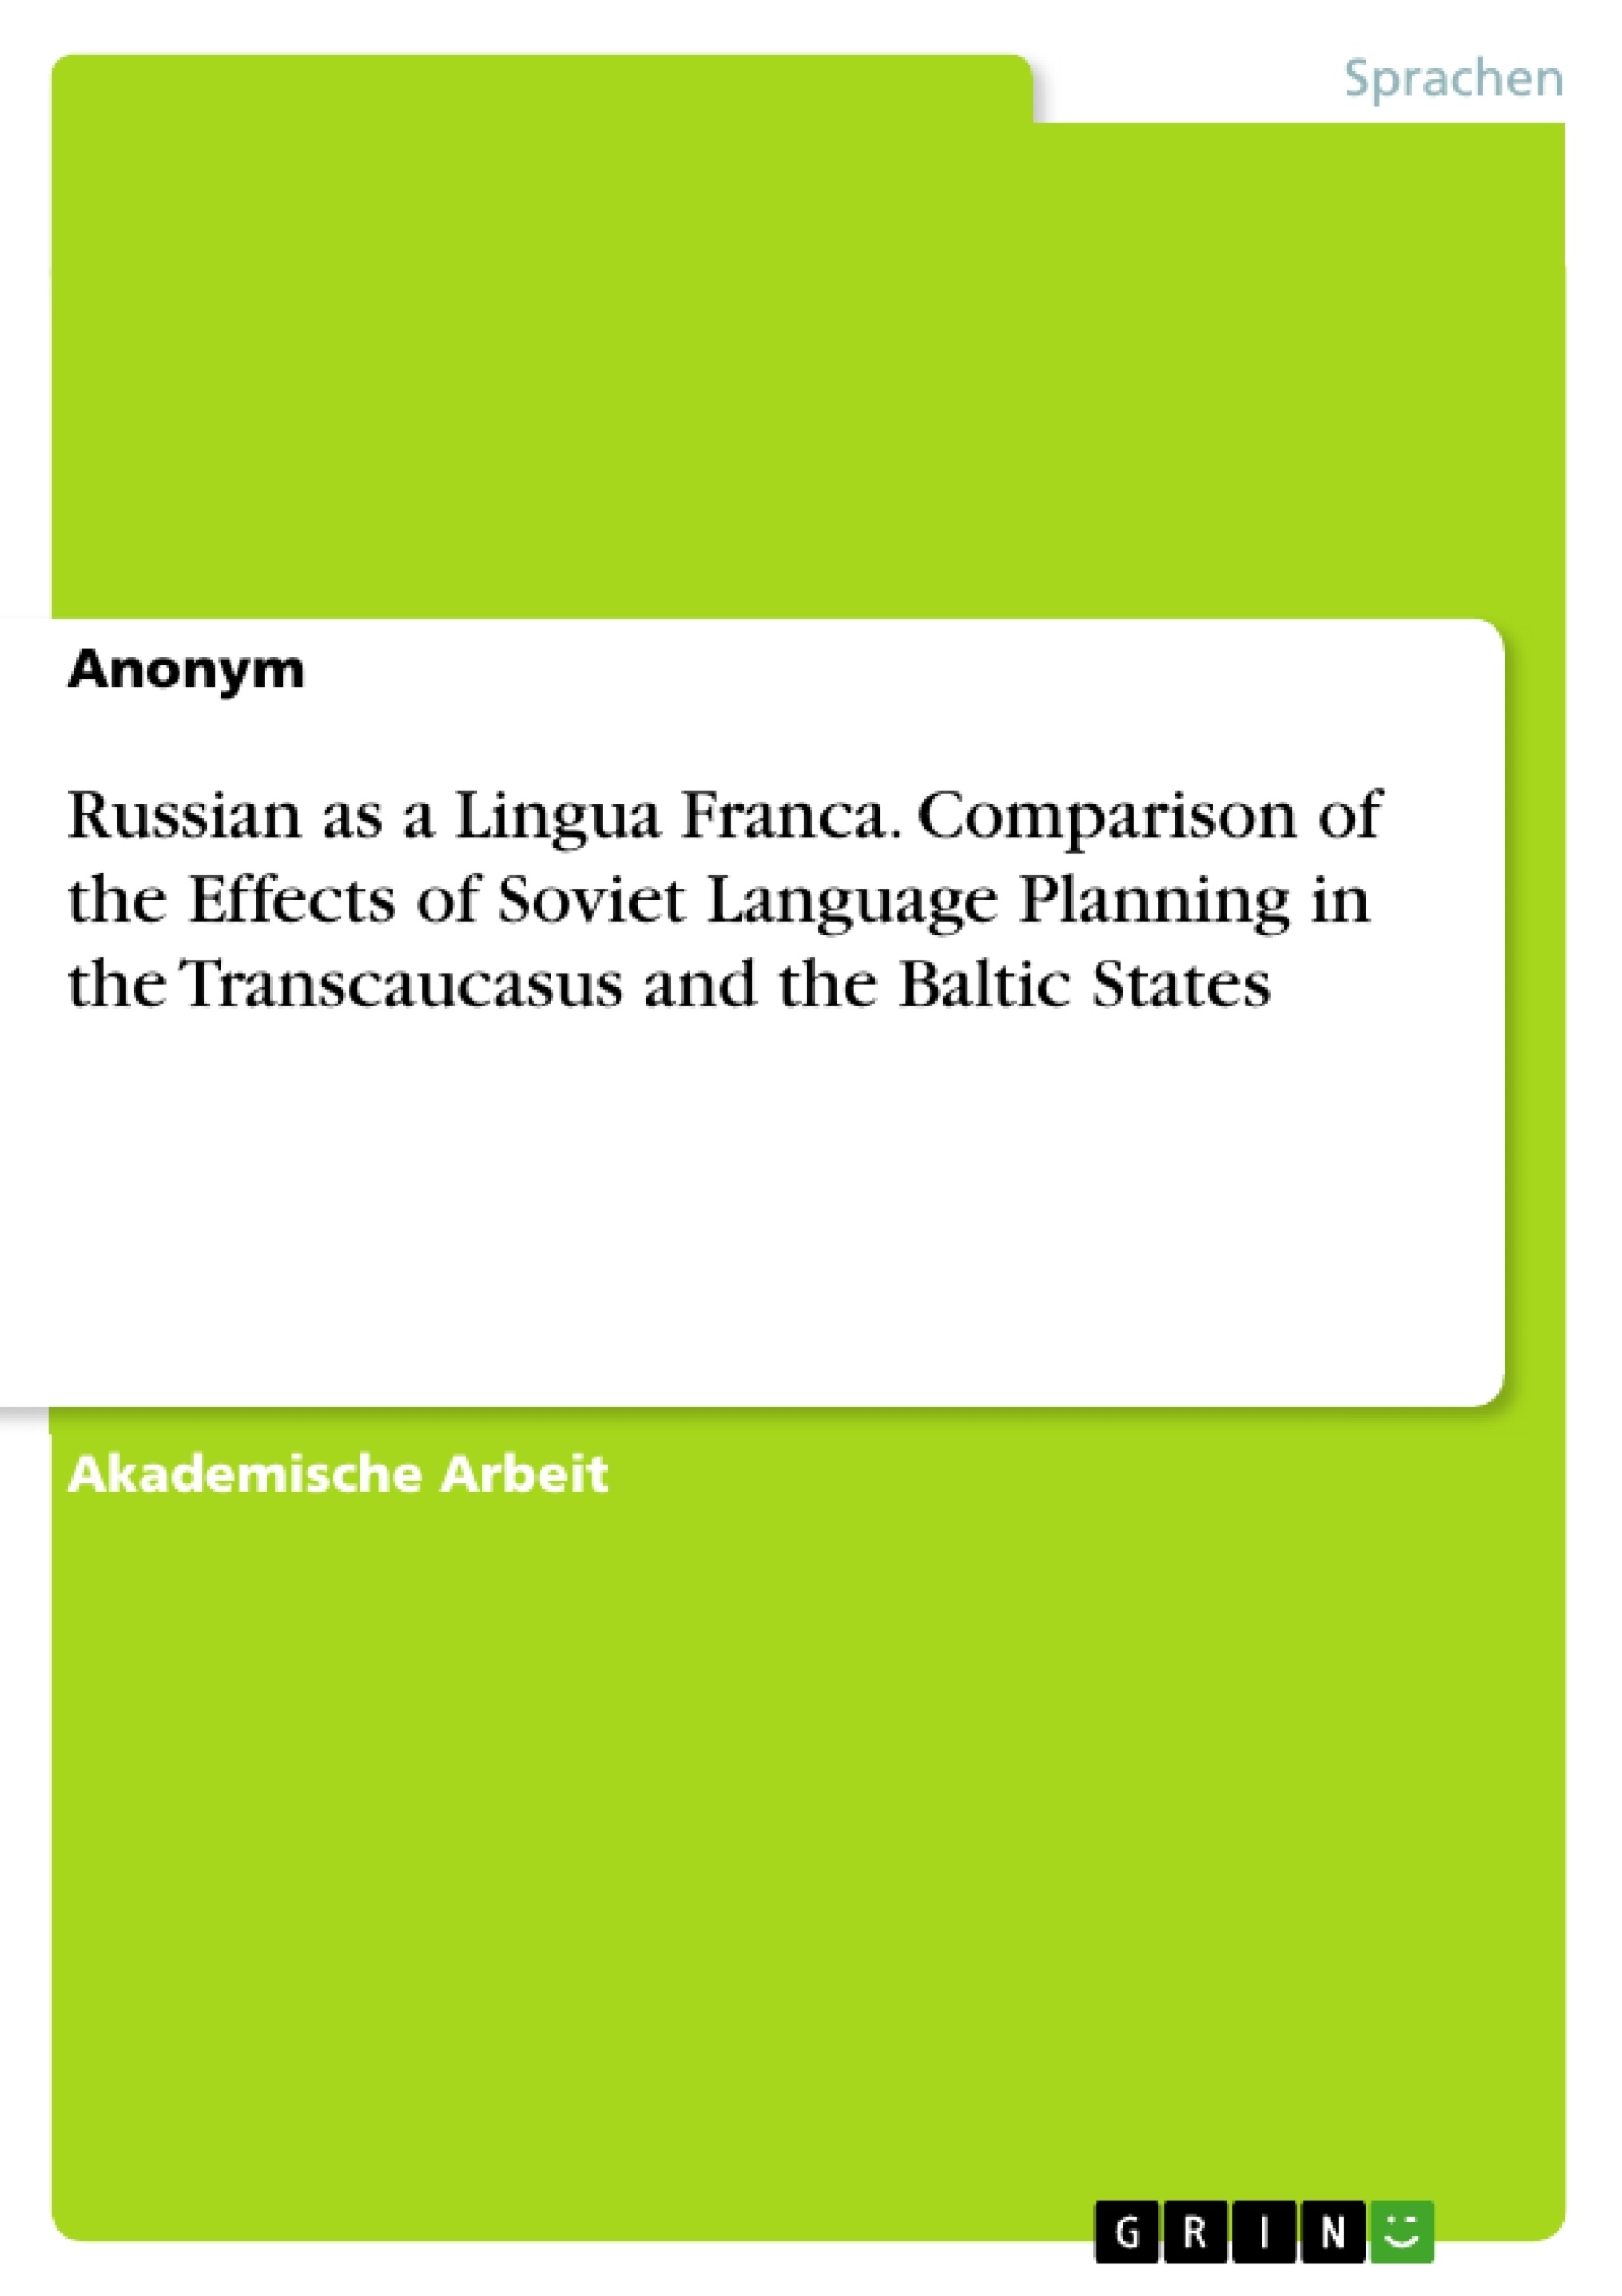 Titel: Russian as a Lingua Franca. Comparison of the Effects of Soviet Language Planning in the Transcaucasus and the Baltic States